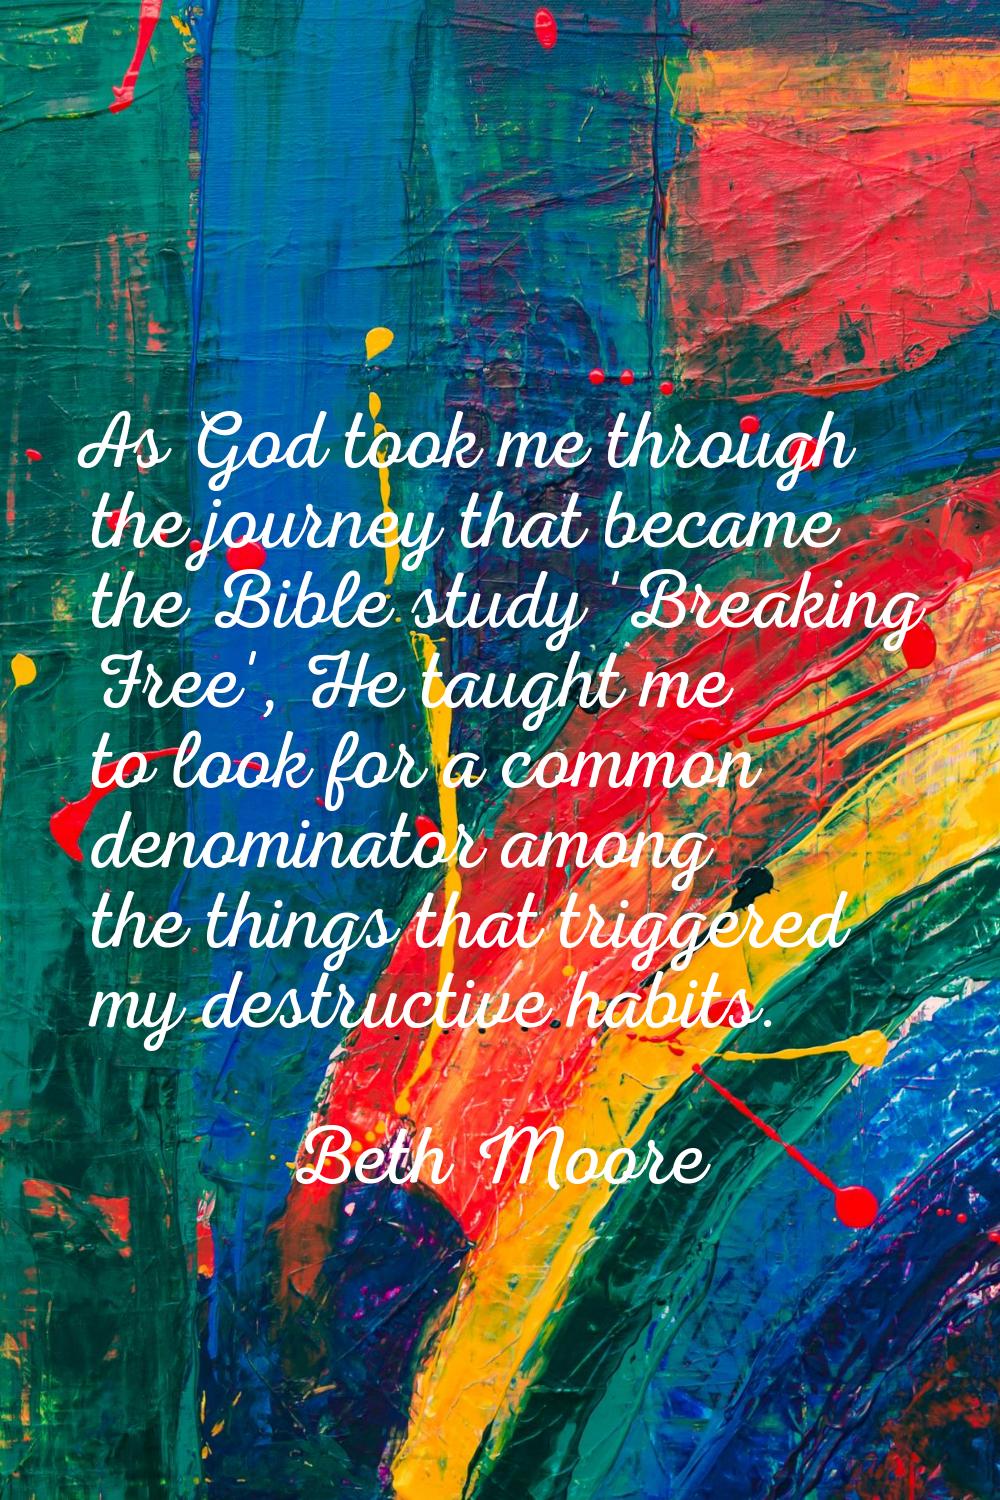 As God took me through the journey that became the Bible study 'Breaking Free', He taught me to loo